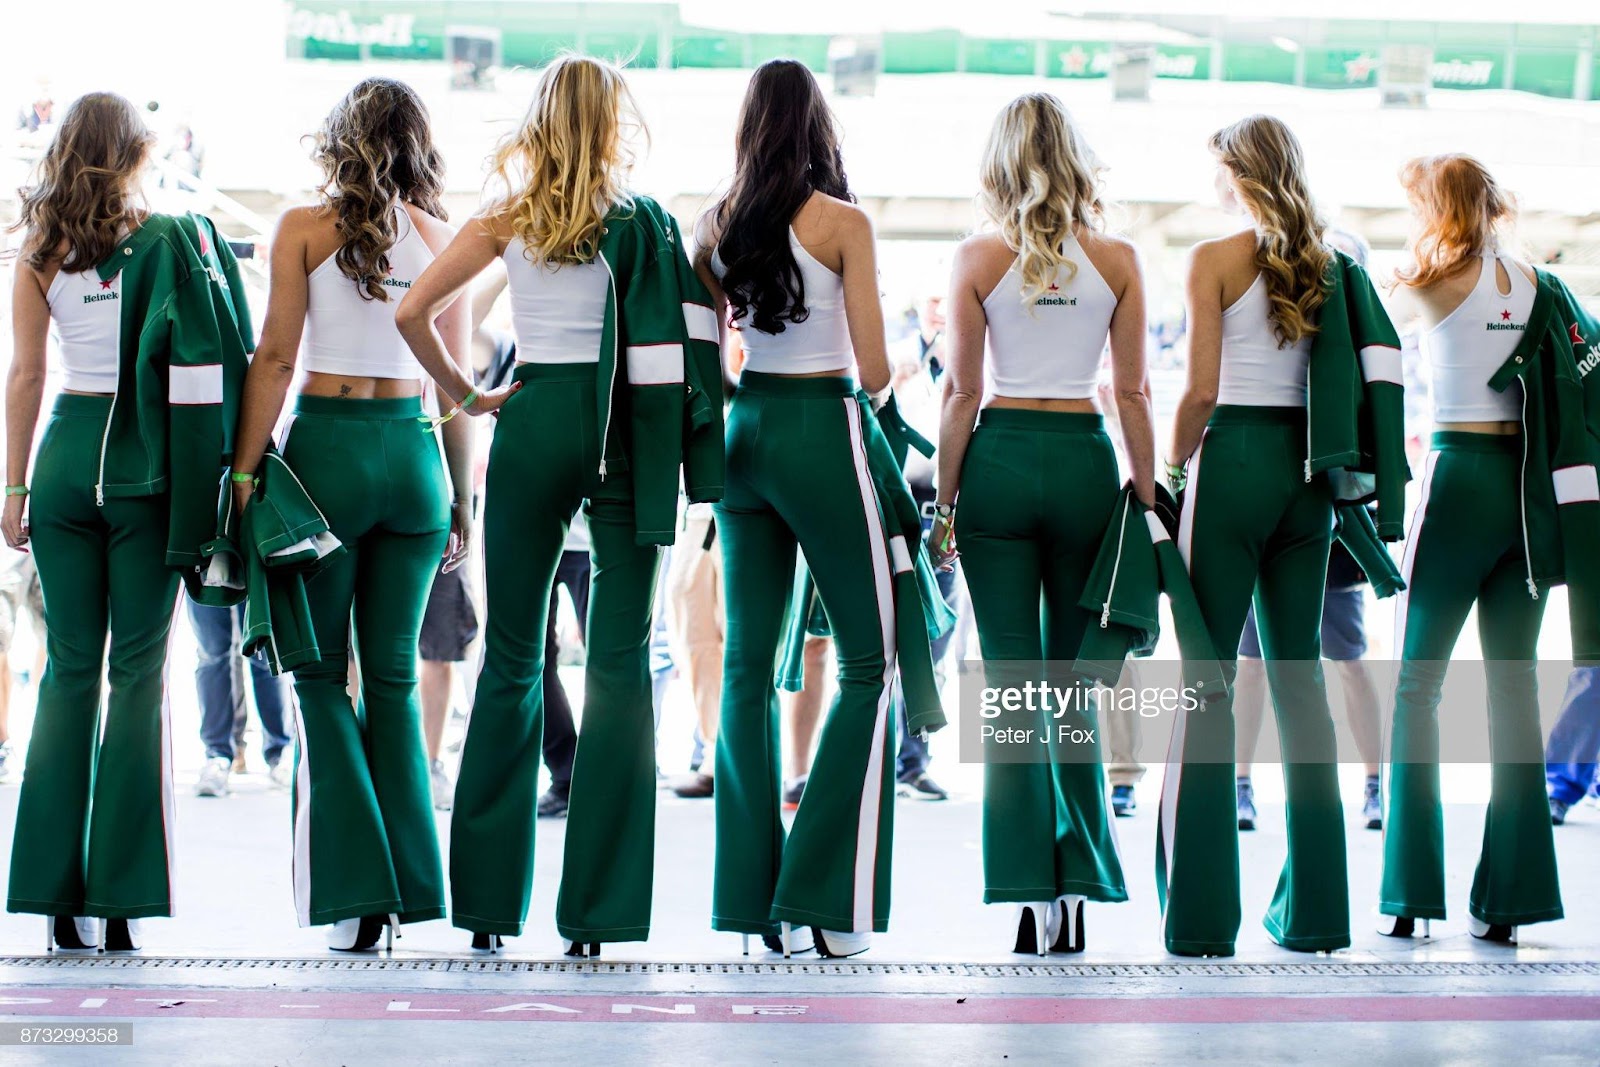 D:\Documenti\posts\posts\Women and motorsport\foto\Getty e altre\heineken-grid-girls-during-the-formula-one-grand-prix-of-brazil-at-picture-id873299358.jpg